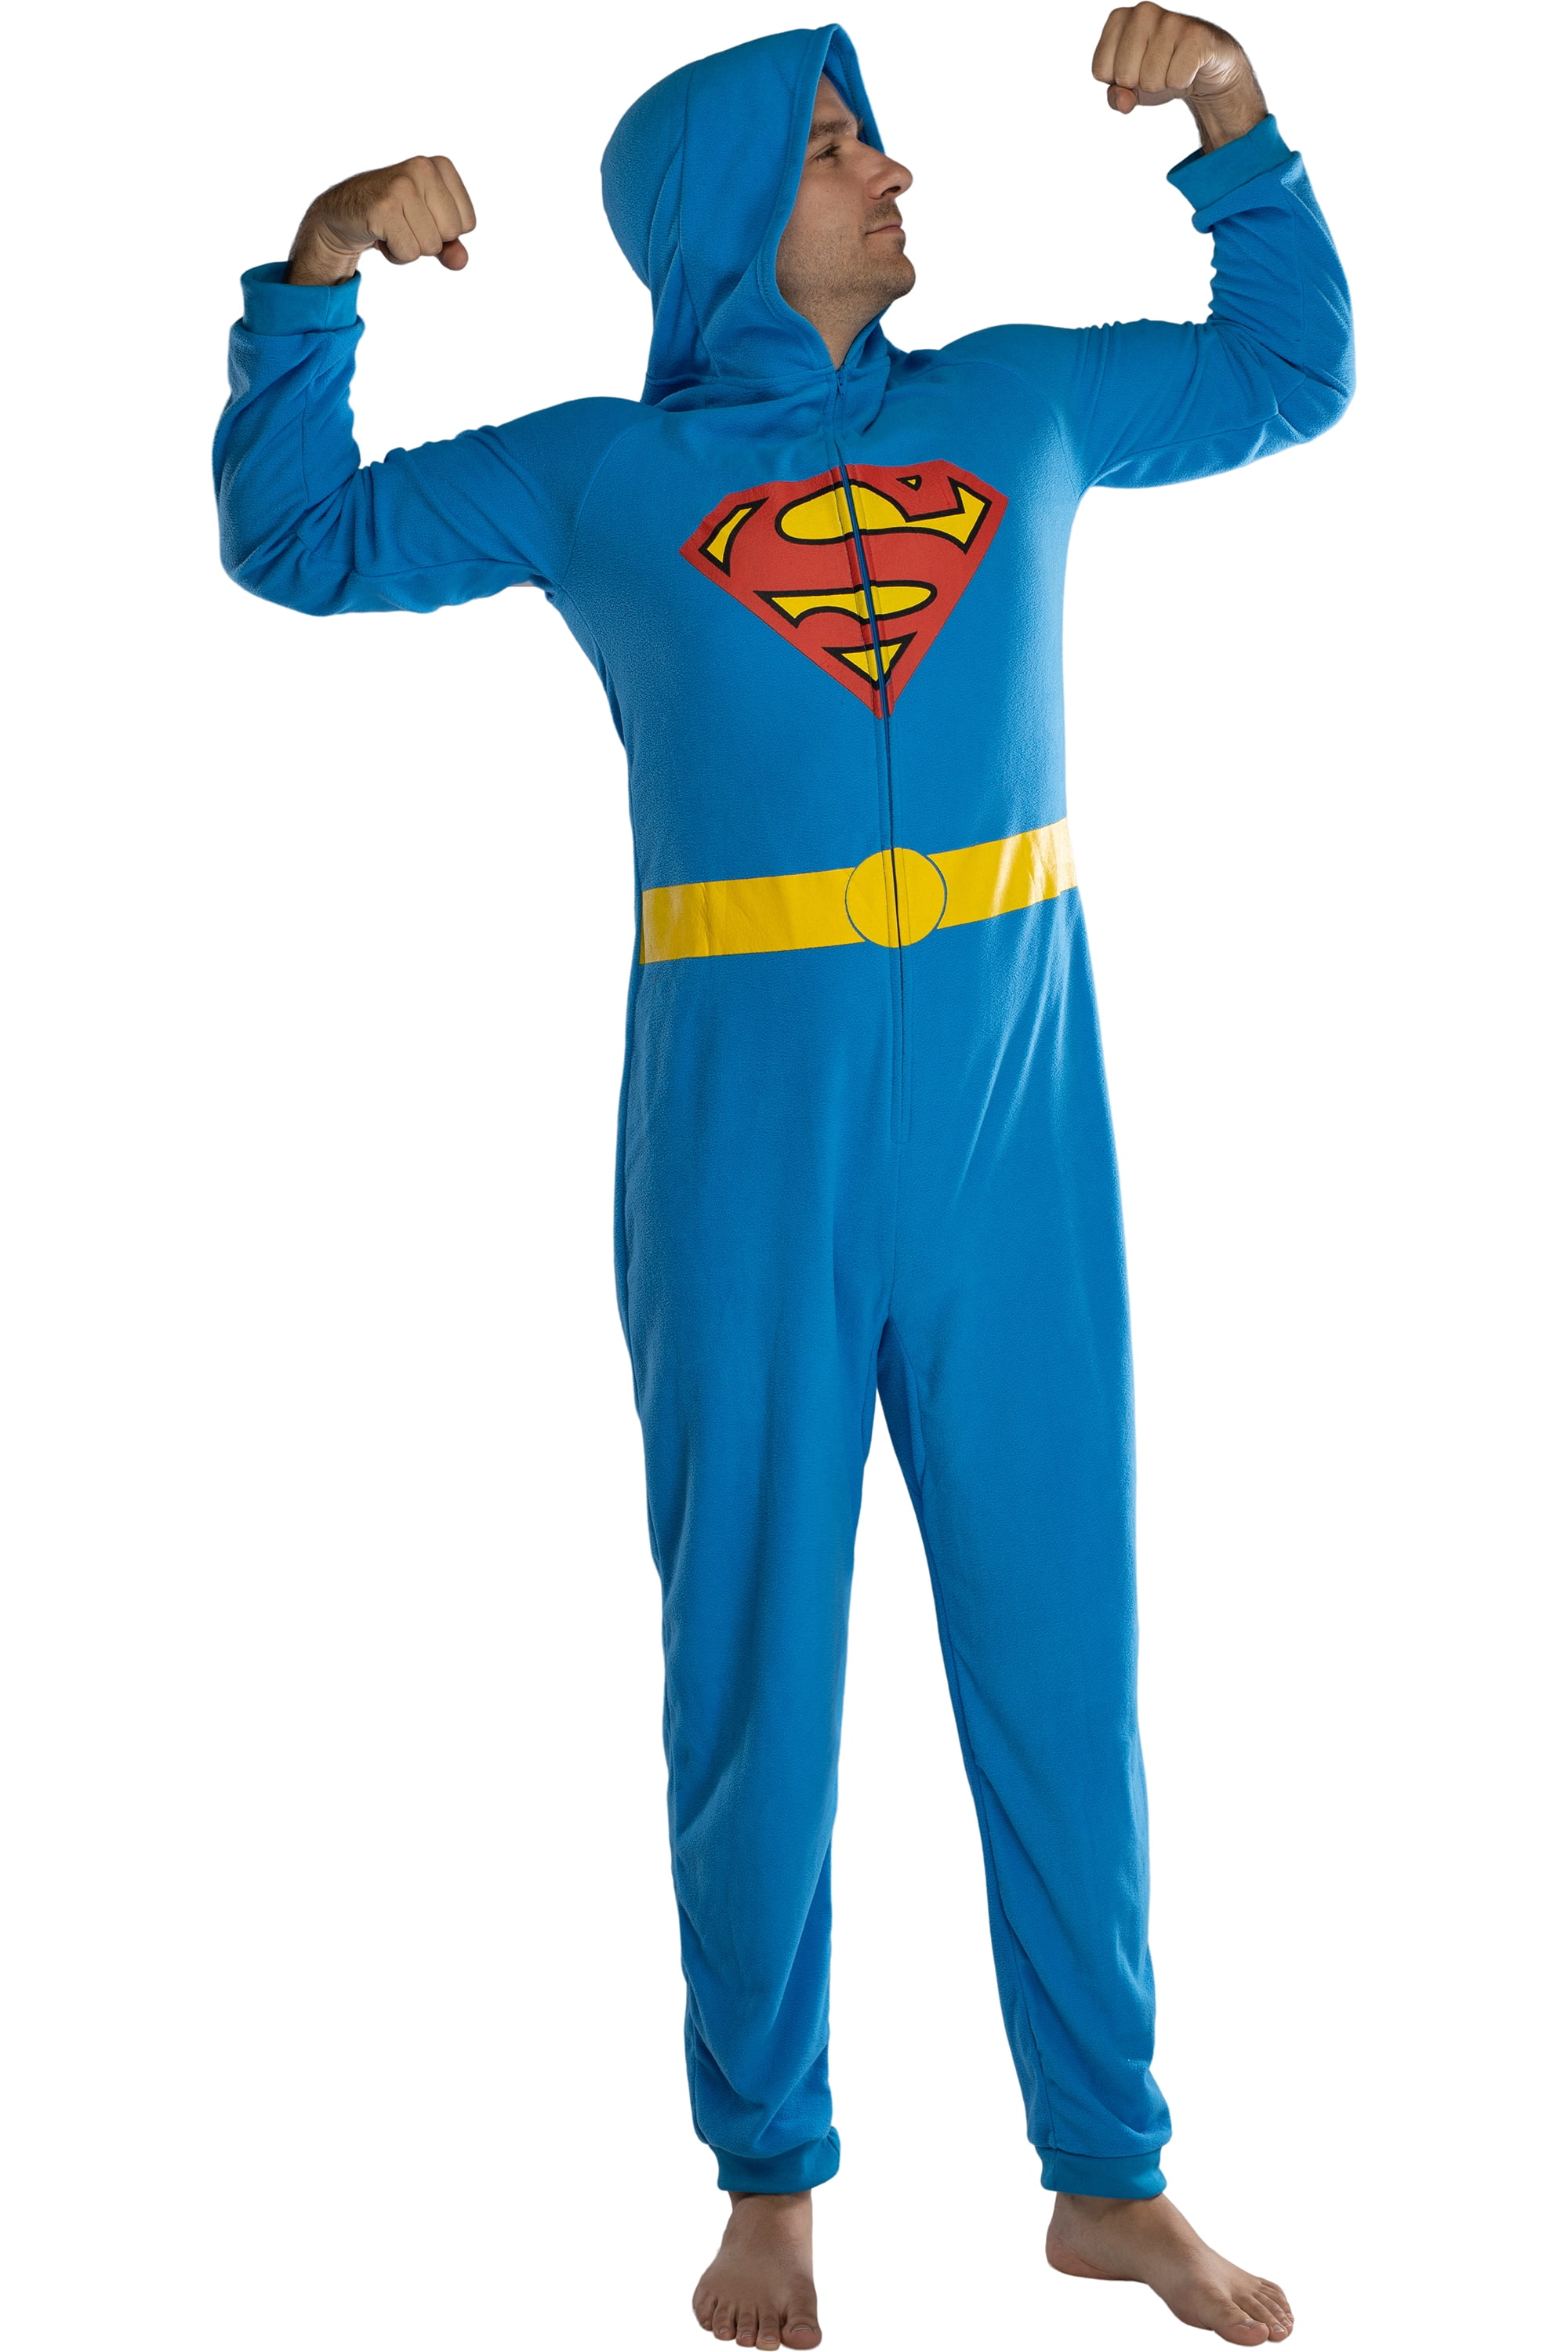 Justice League Boys Family Cosplay Union Suit 